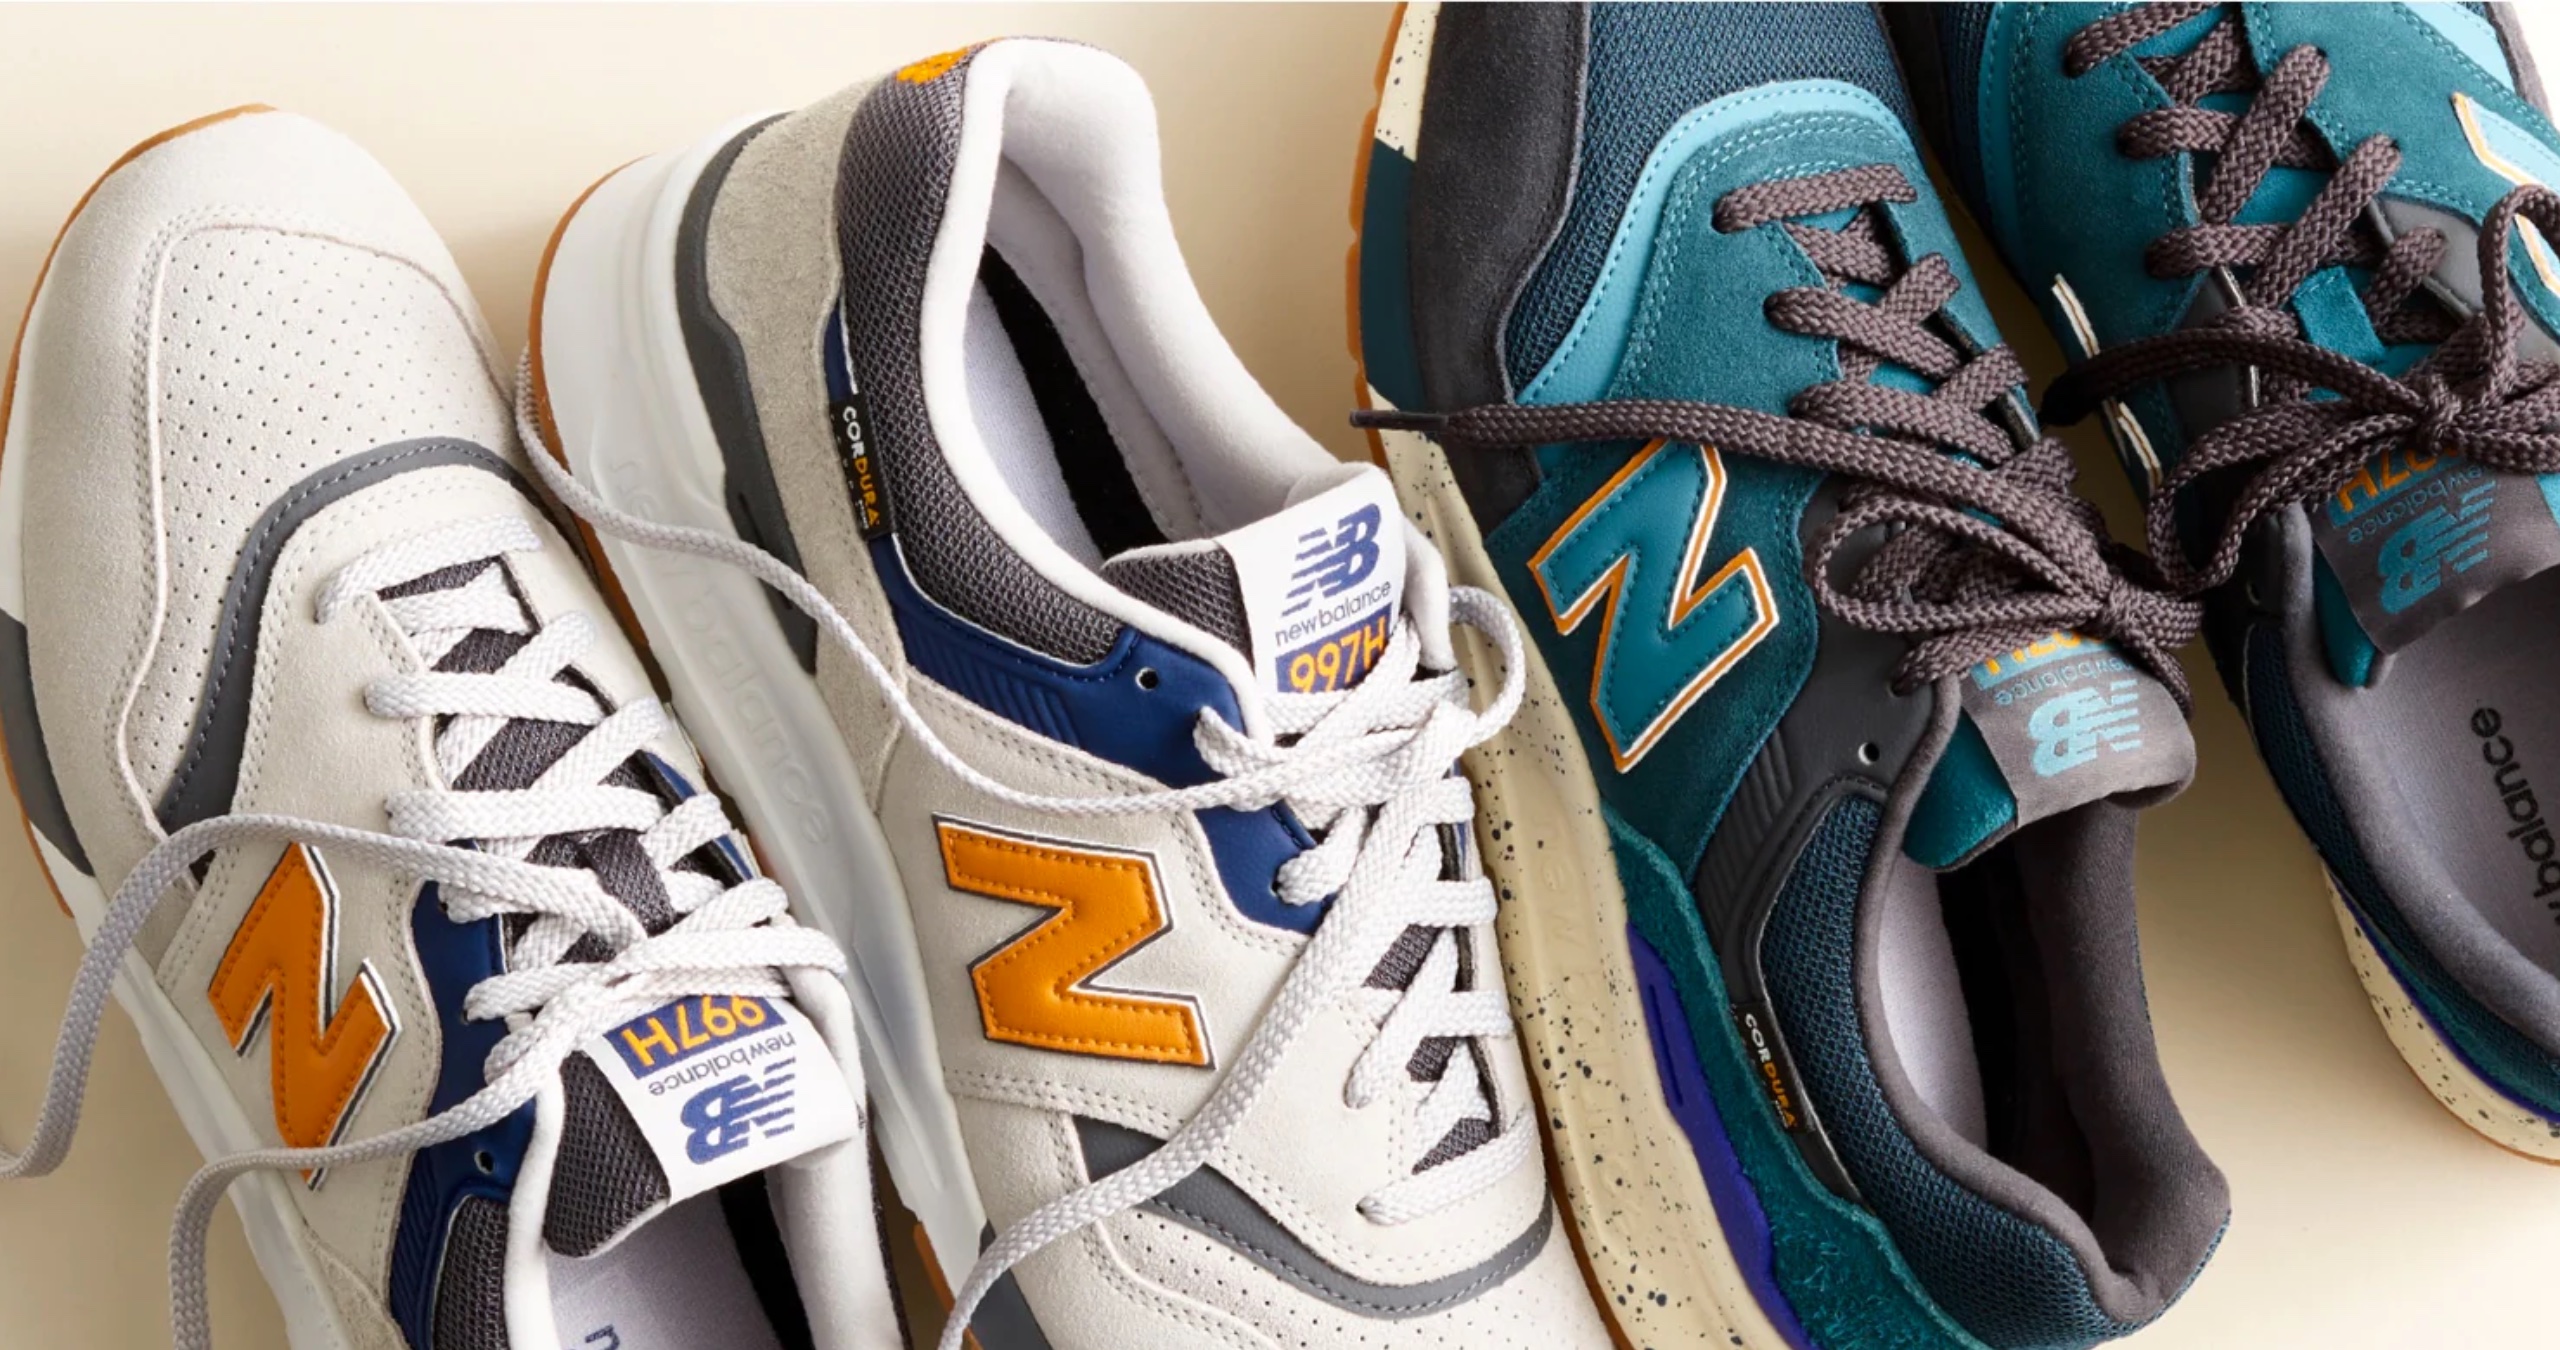 Diver Fable Hairdresser J.Crew partners with New Balance for an exclusive sneaker coll - 9to5Toys